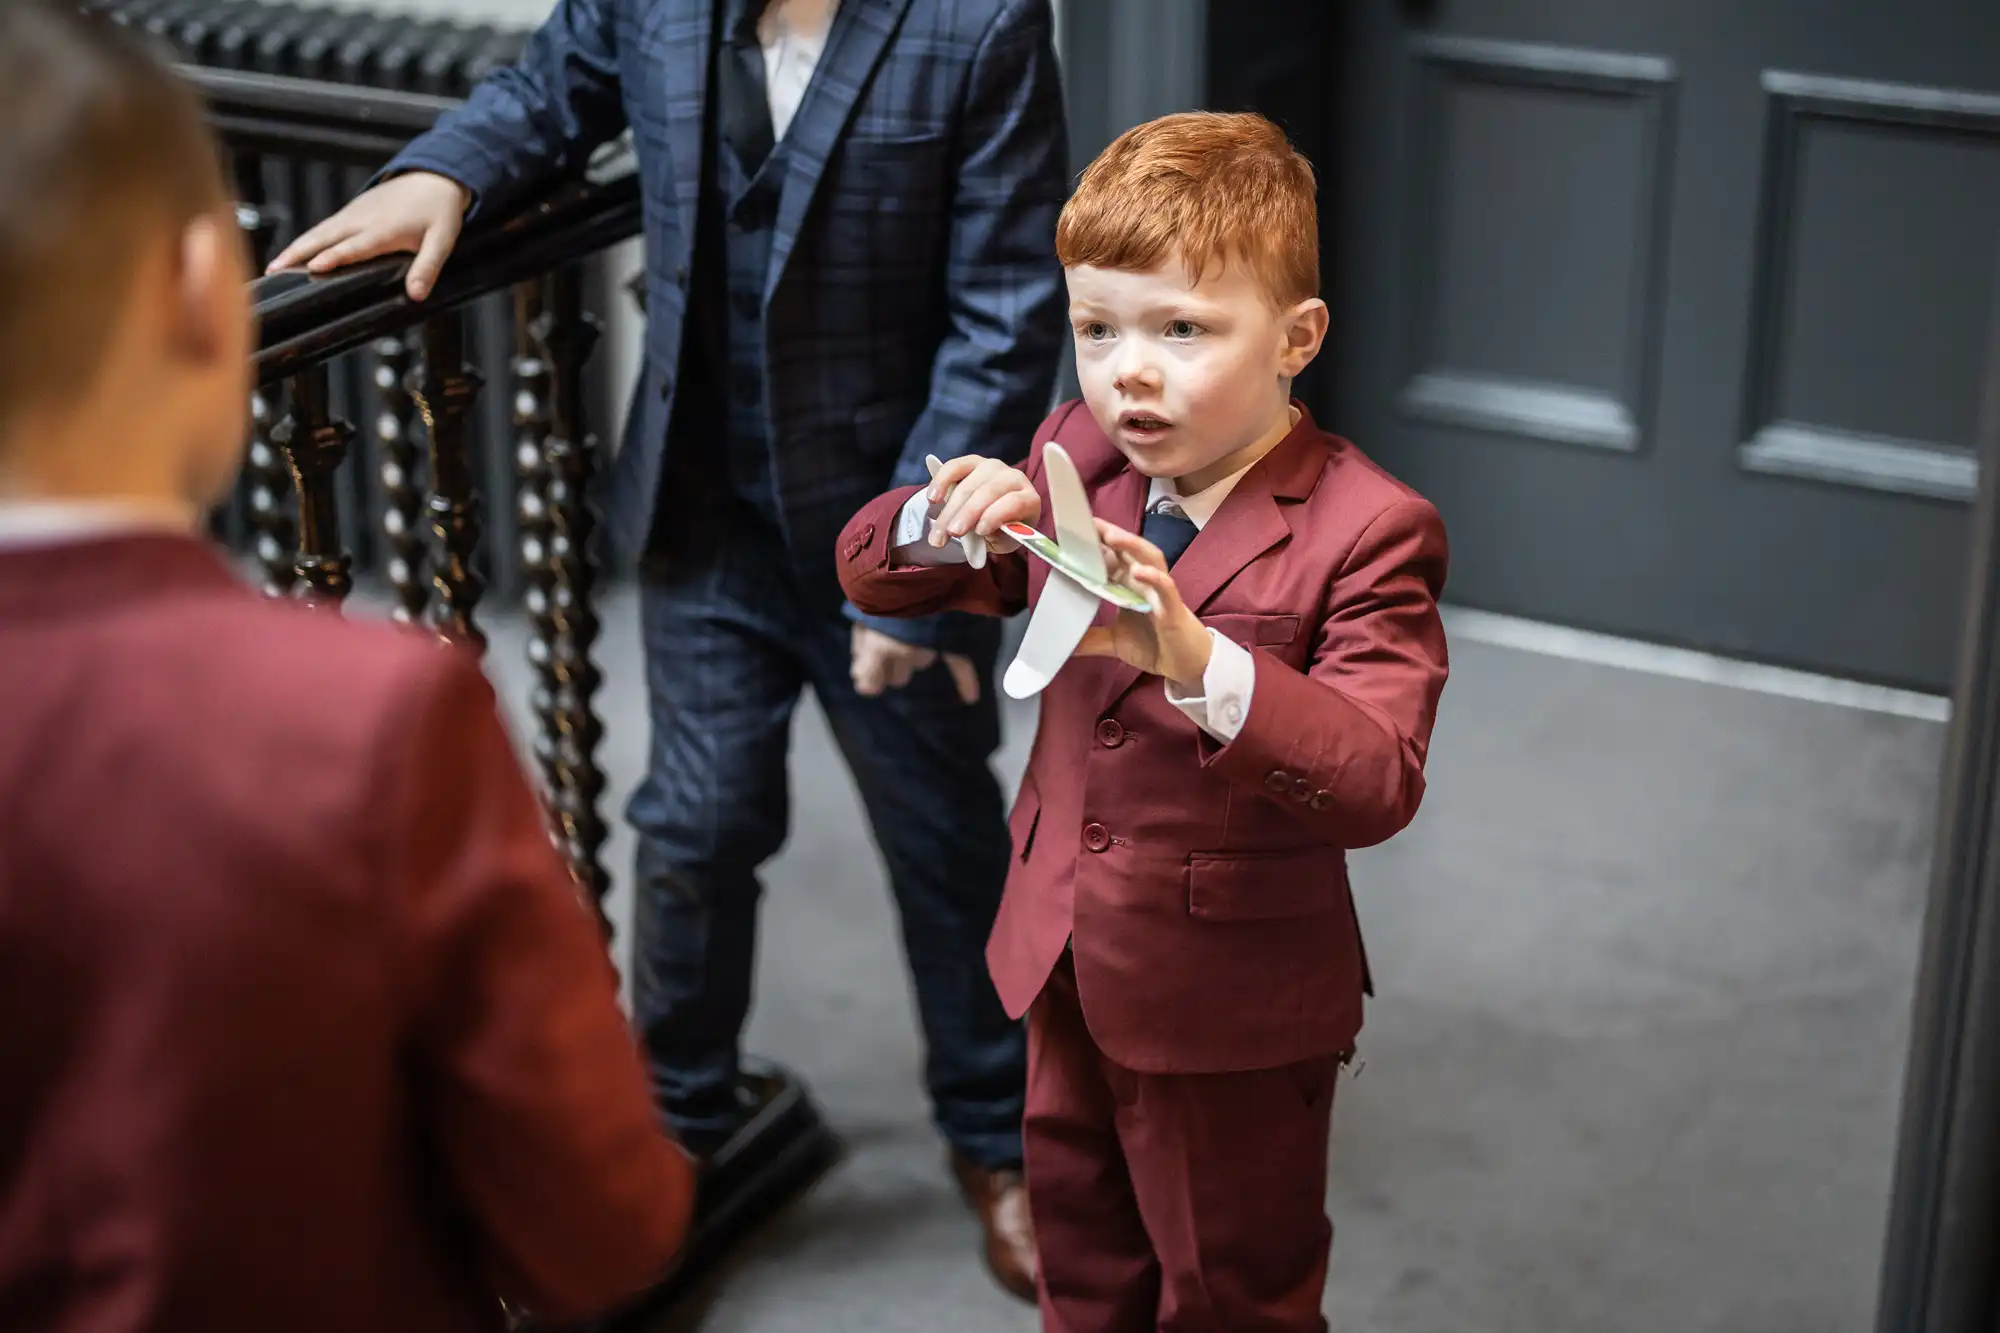 A young boy in a maroon suit holds a toy while talking to another child in a similar suit. A third child, dressed in a navy suit, stands next to a staircase railing in the background.